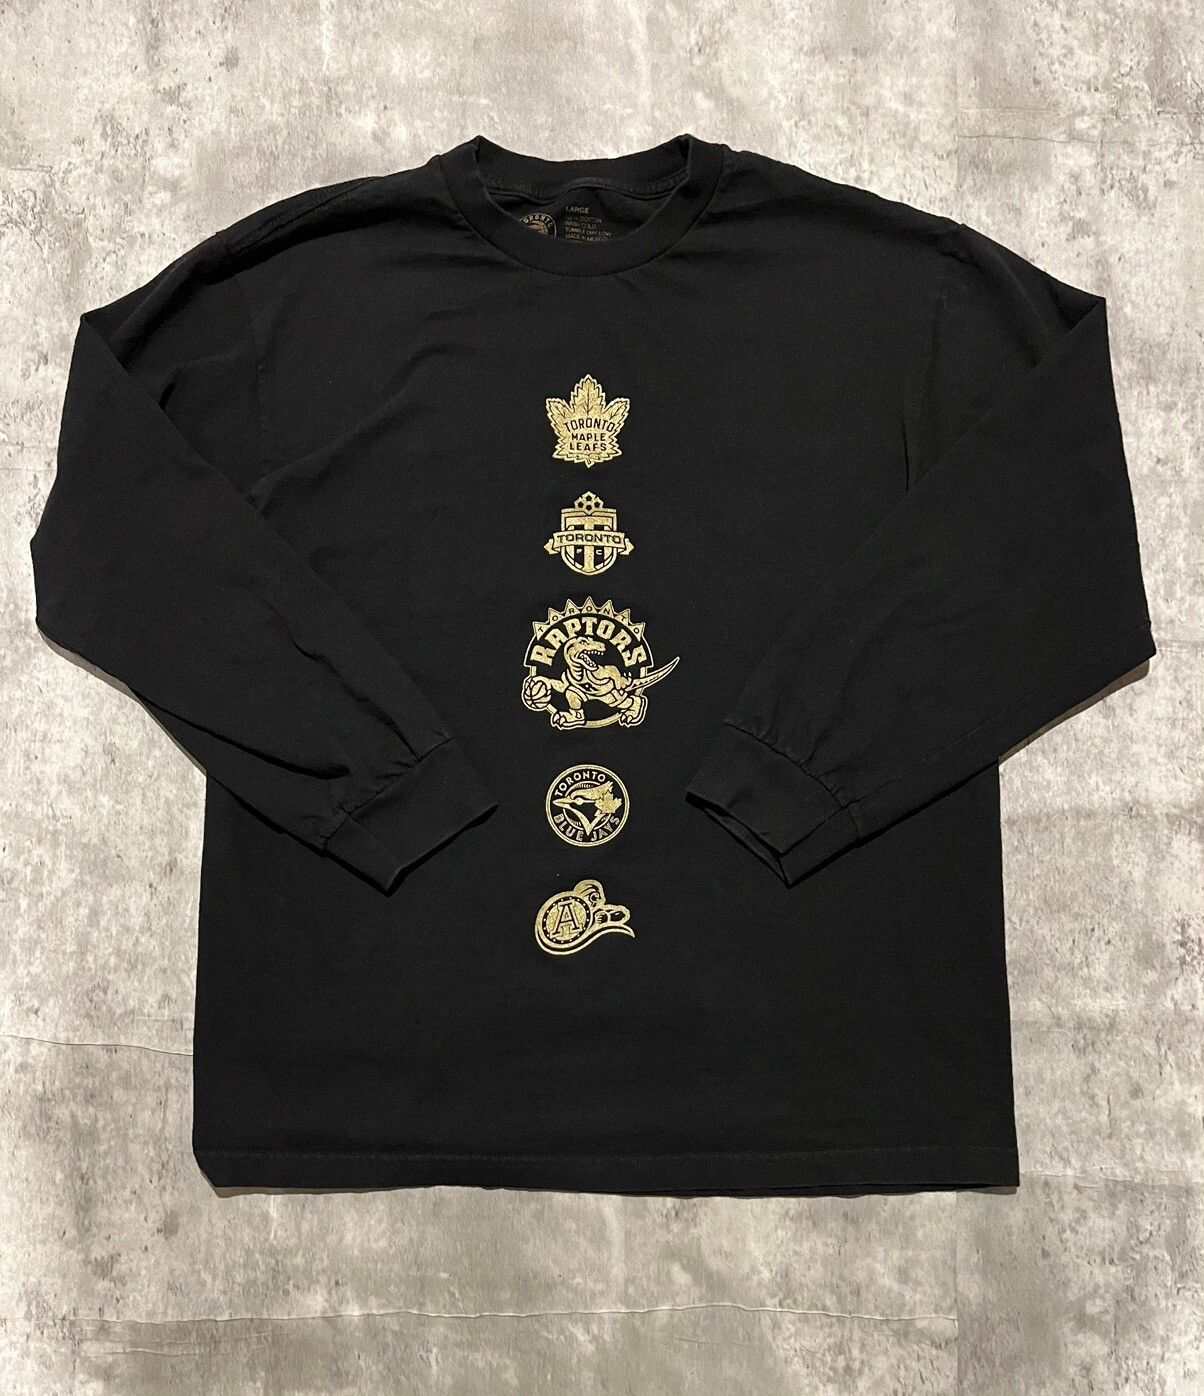 Octobers Very Own OVO x Toronto Raptors Drake Night 2018 Long Sleeve Tee Size US L / EU 52-54 / 3 - 1 Preview